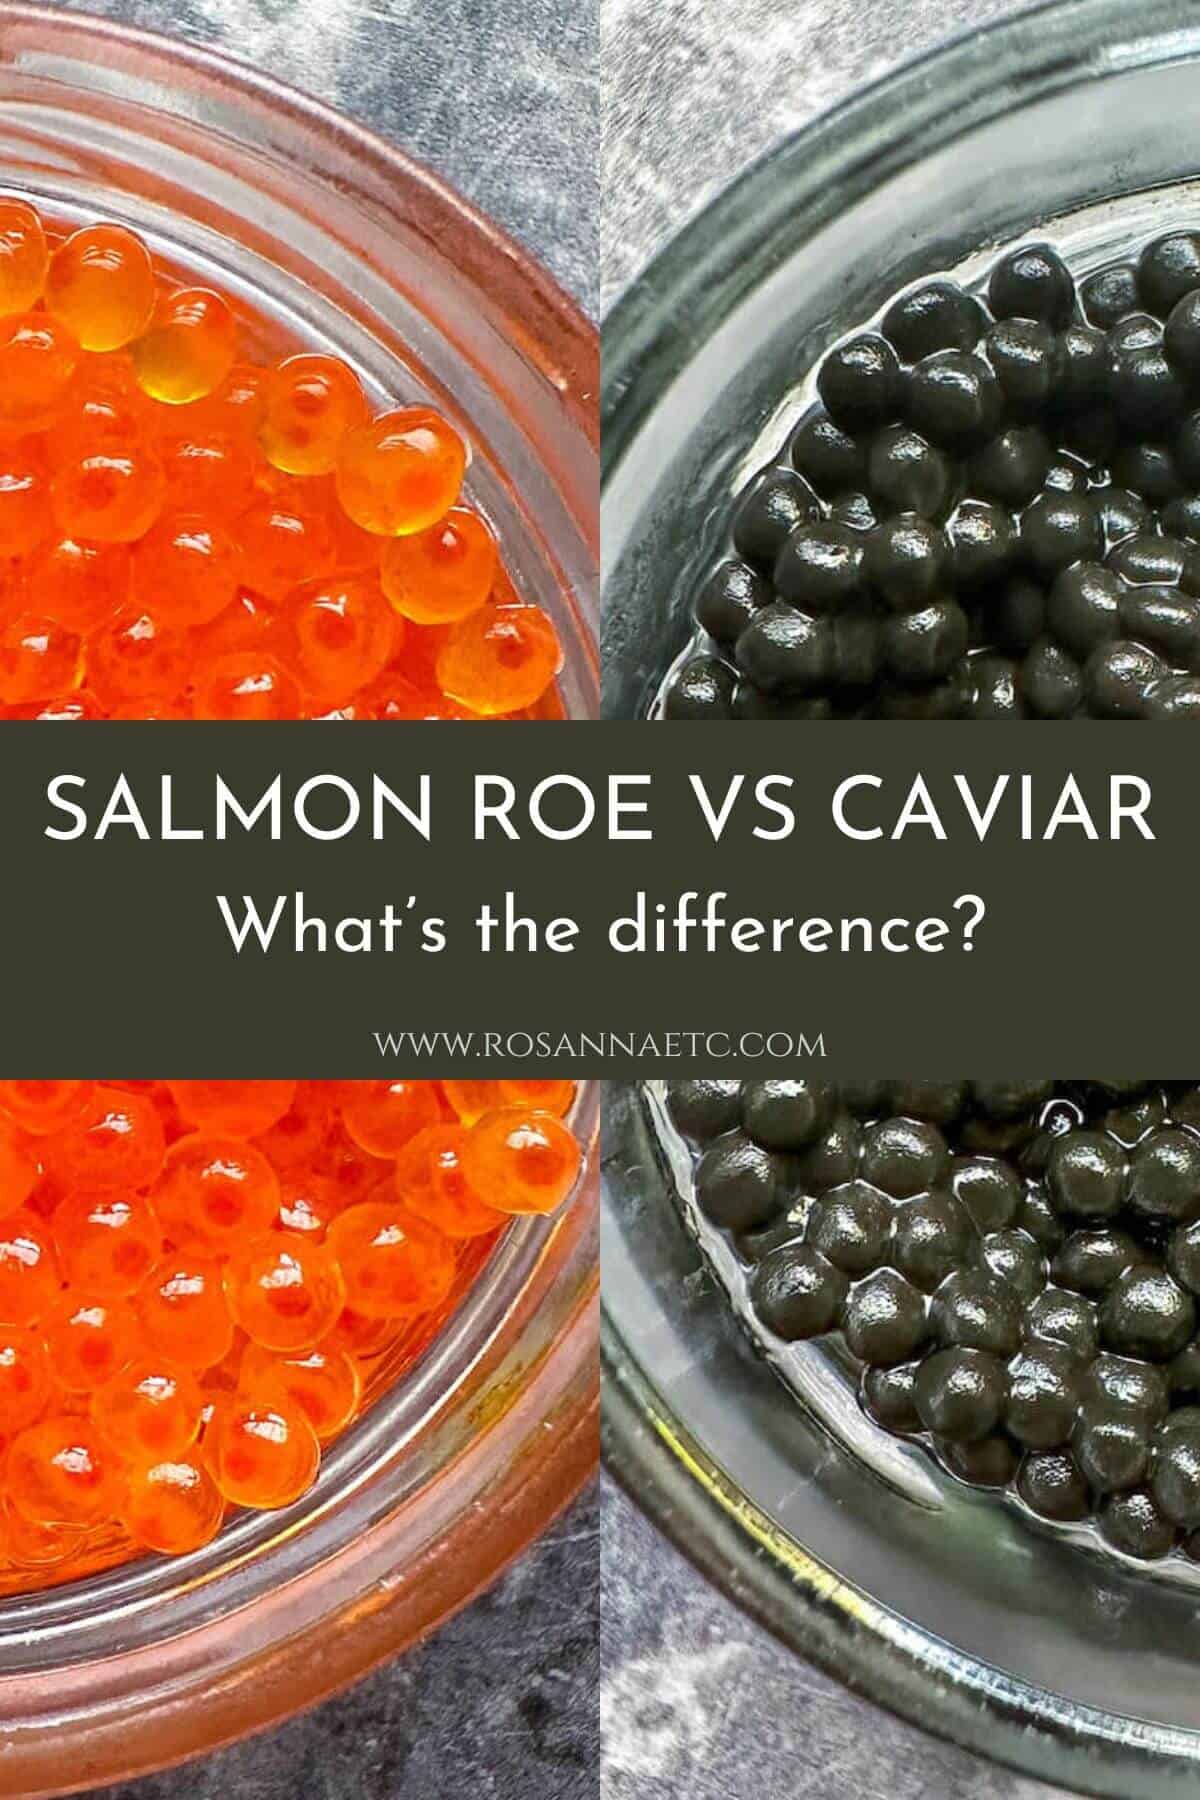 Two pots of salmon roe and caviar next to each other with text overlay.